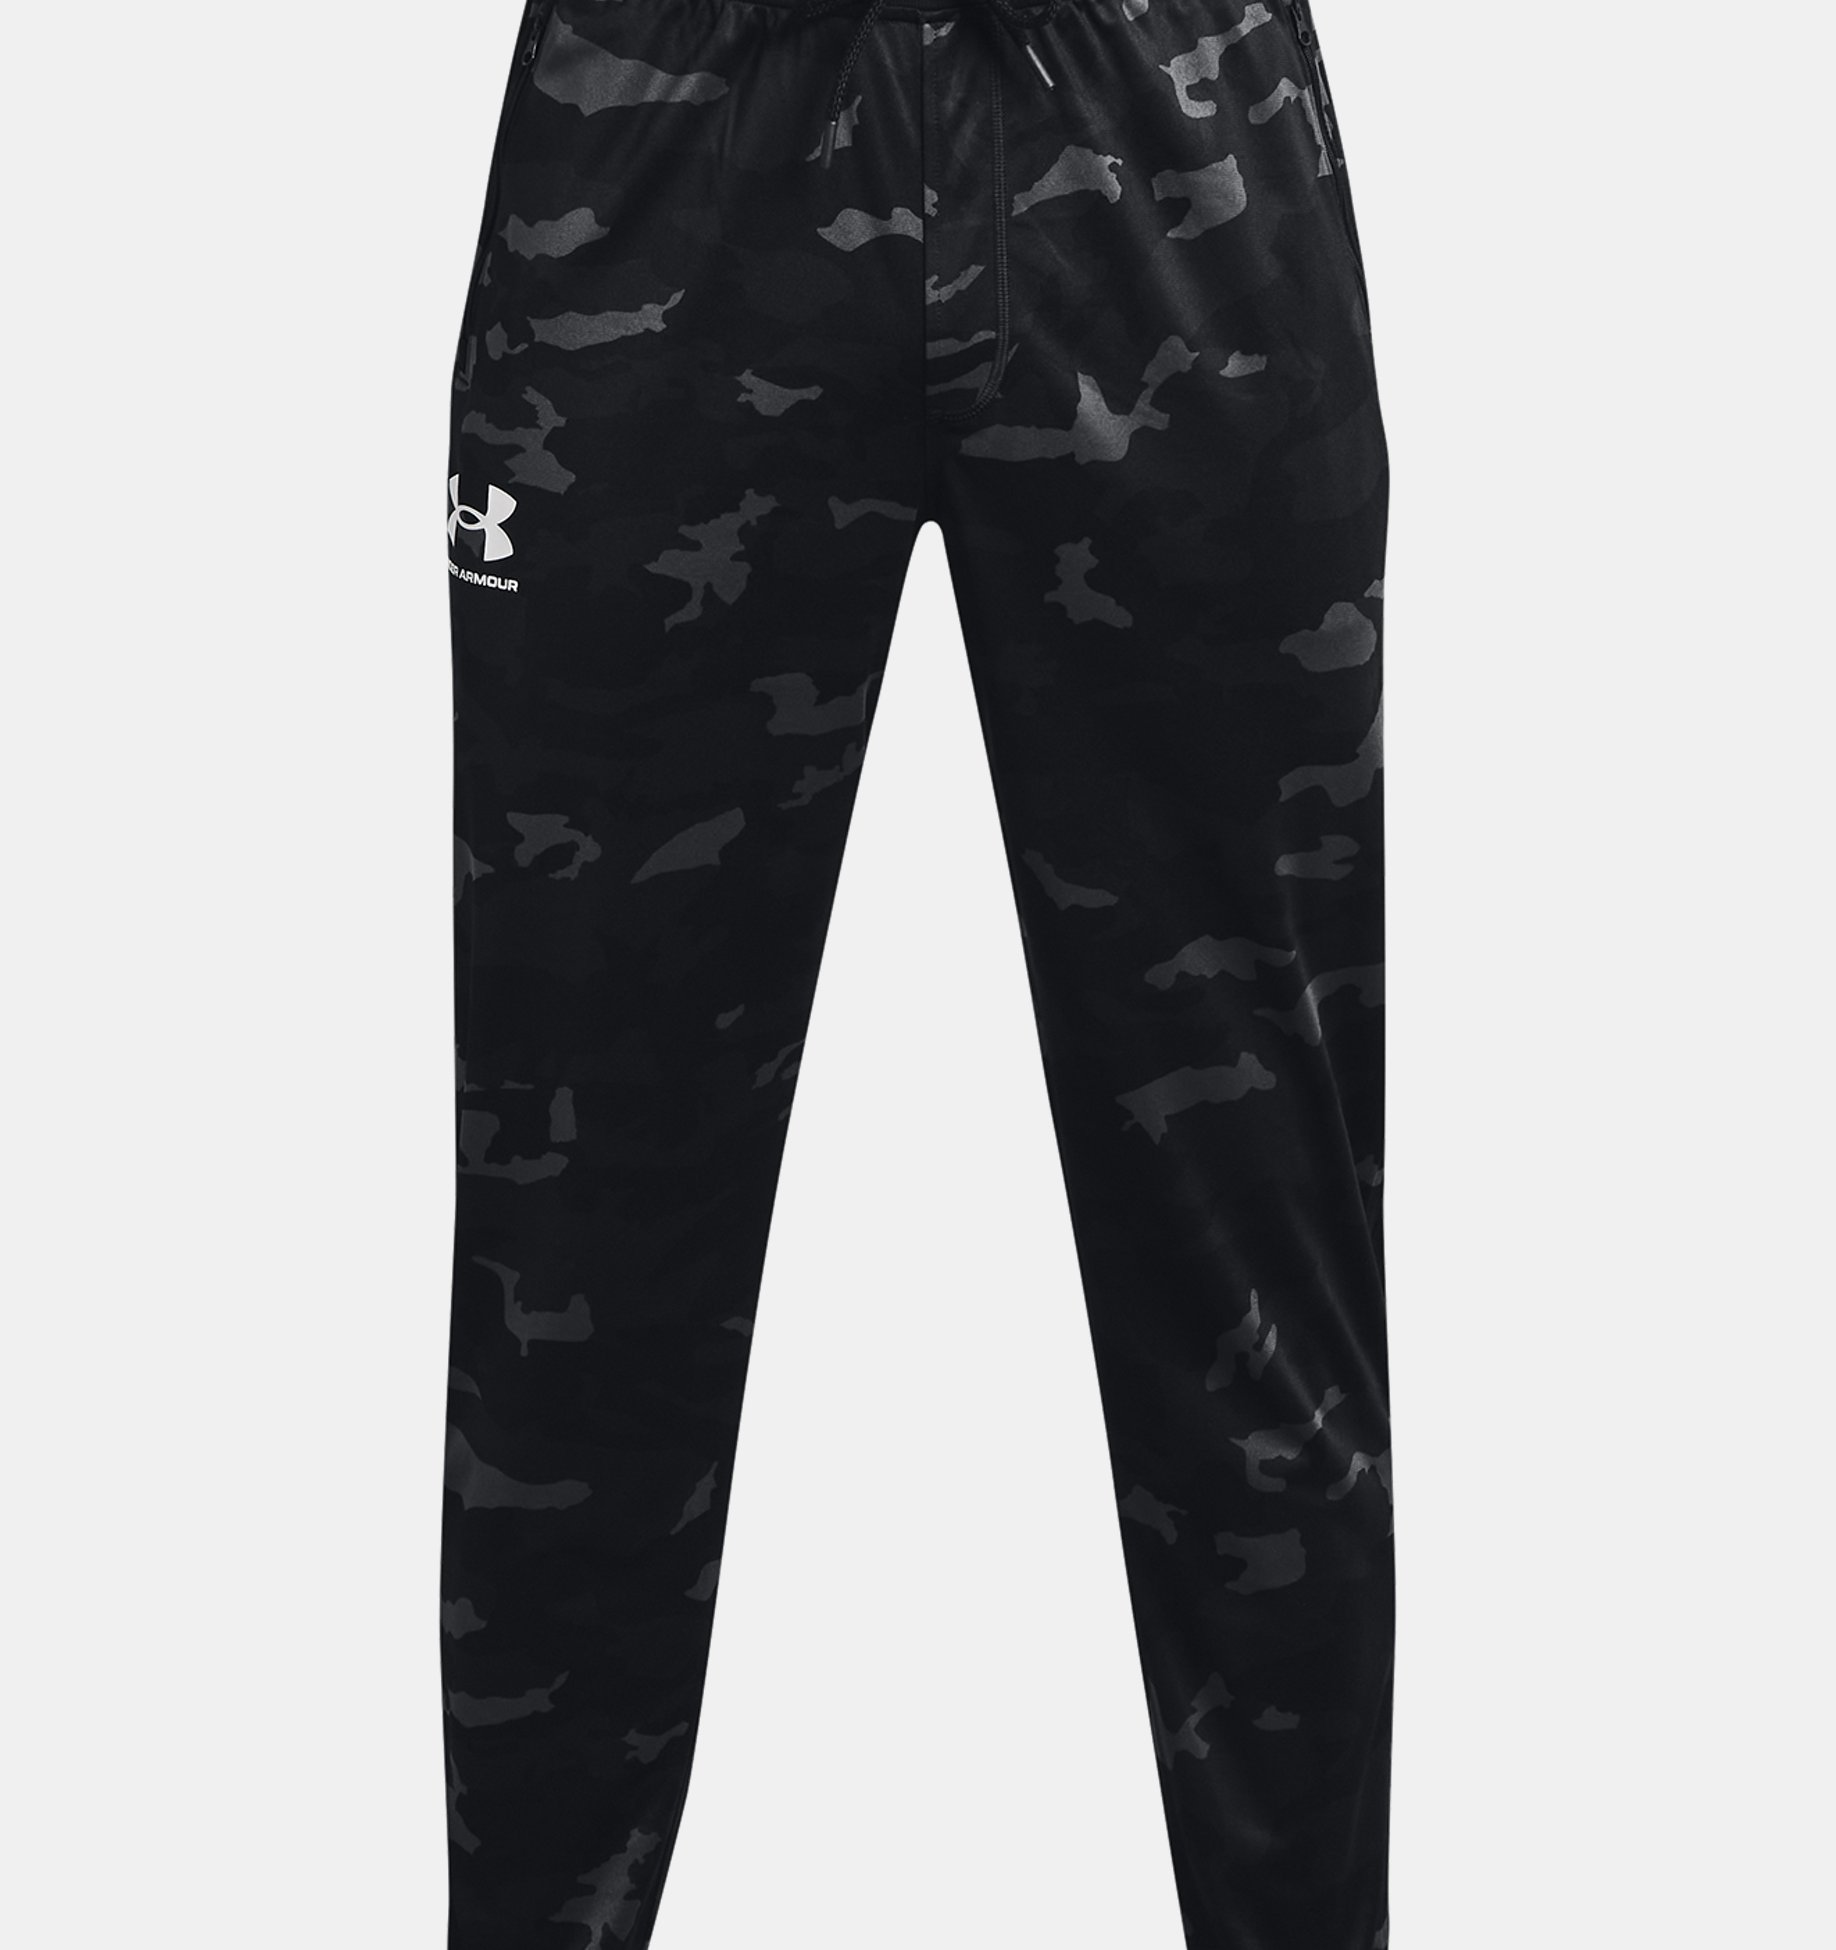 supermarkt peper Fruitig Men's UA Sportstyle Tricot Printed Joggers | Under Armour